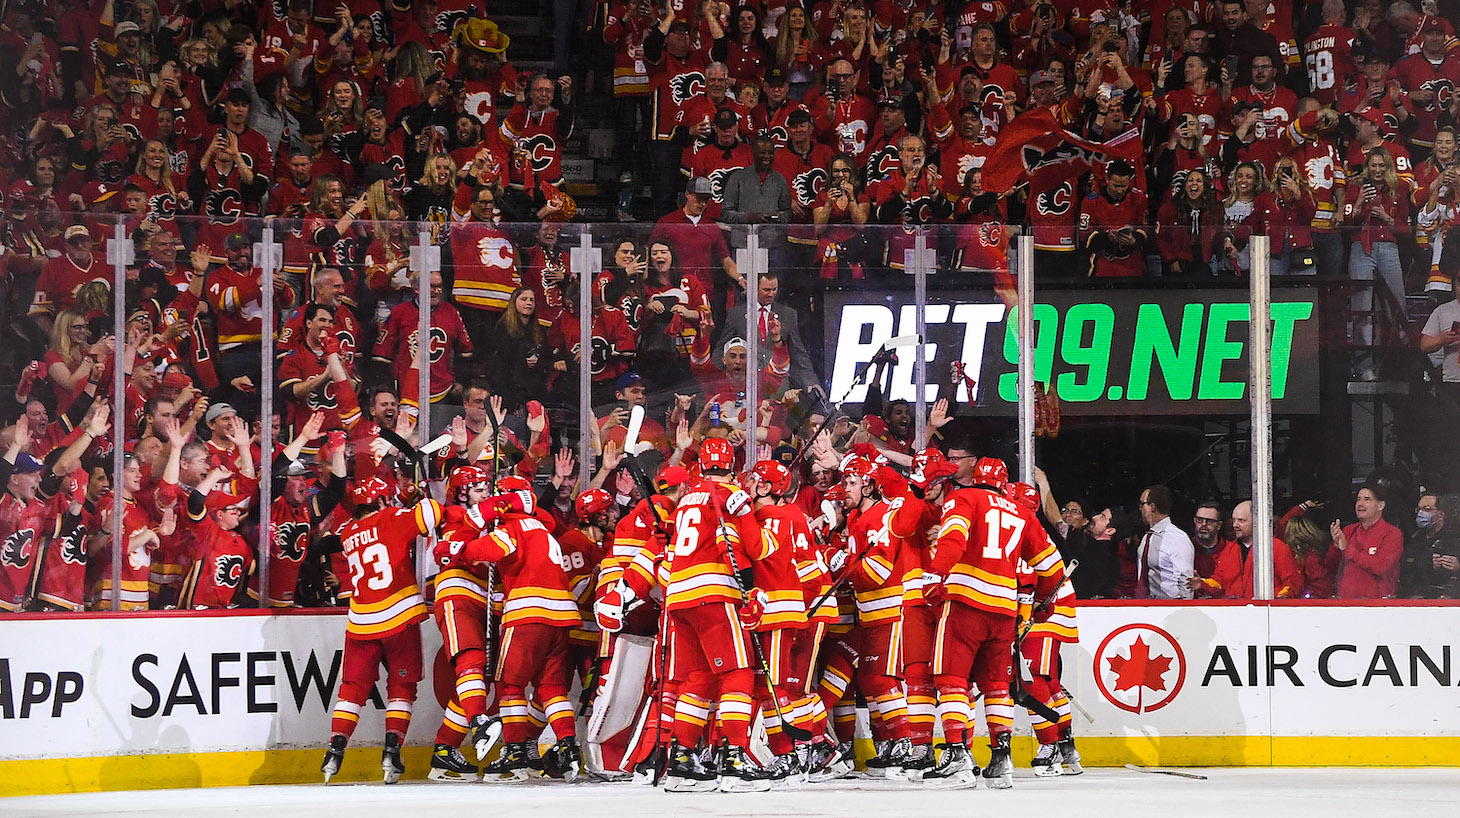 CALGARY, AB - MAY 15: The Calgary Flames celebrate after defeating the Dallas Stars during the overtime period of Game Seven of the First Round of the 2022 Stanley Cup Playoffs at Scotiabank Saddledome on May 15, 2022 in Calgary, Alberta, Canada. The Flames defeated the Stars 3-2 in overtime. (Photo by Derek Leung/Getty Images)